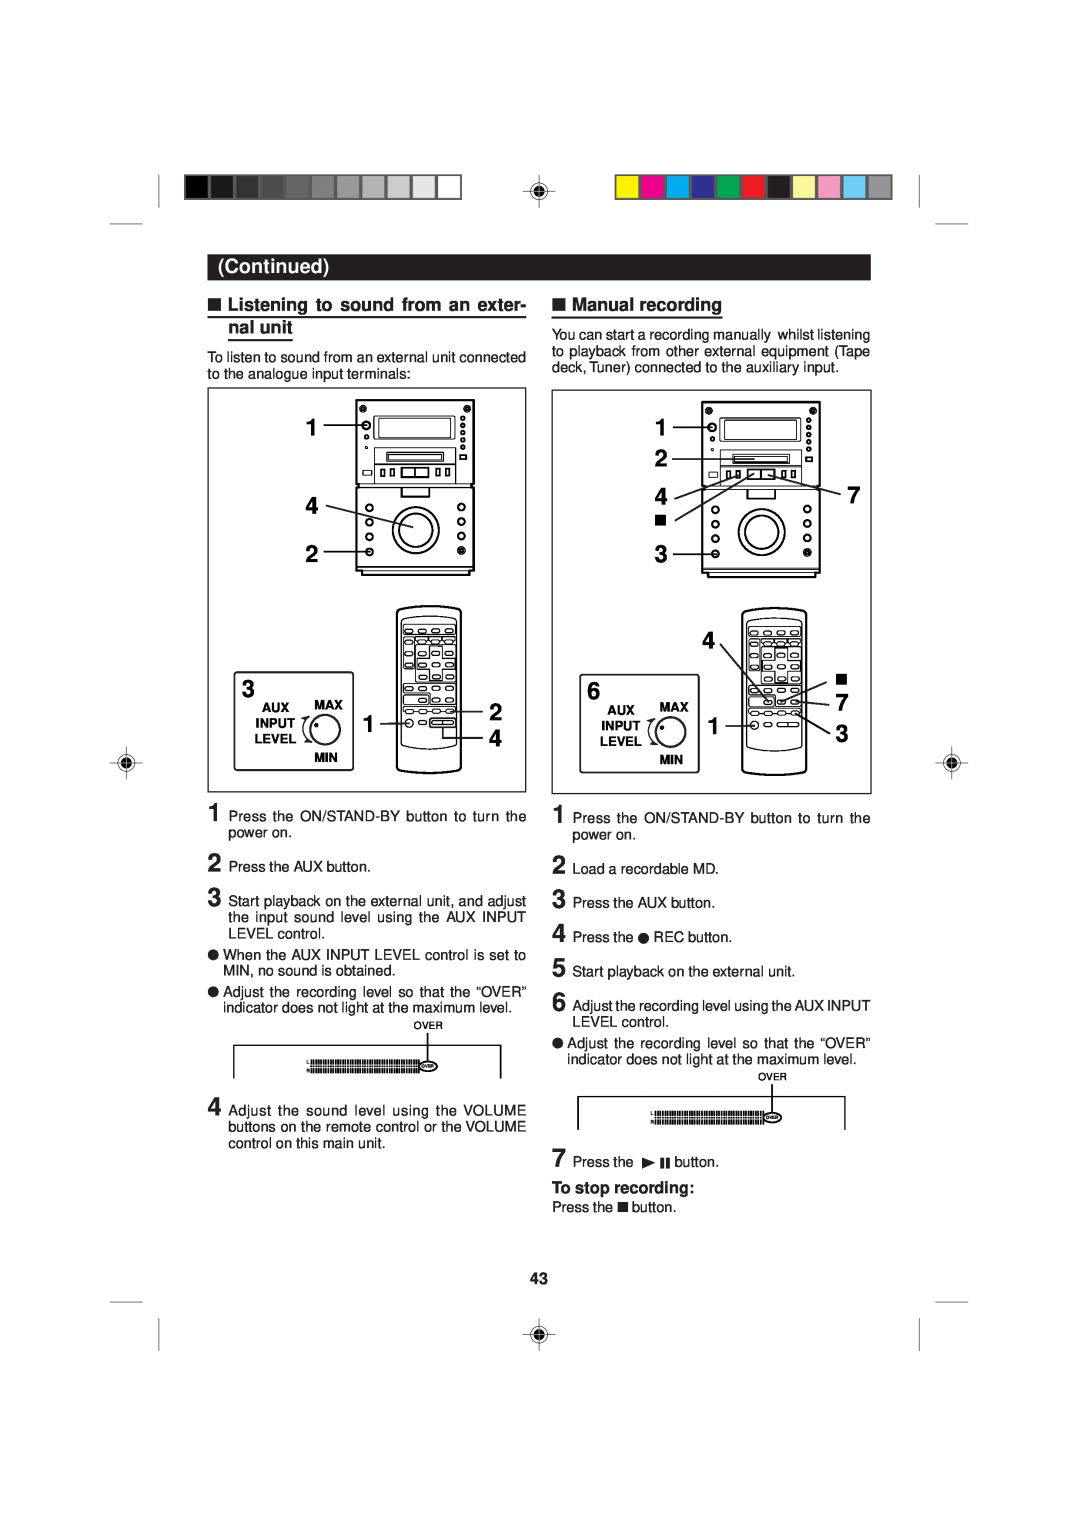 Sharp MD-M1H operation manual Listening to sound from an exter-nal unit, Manual recording, To stop recording 